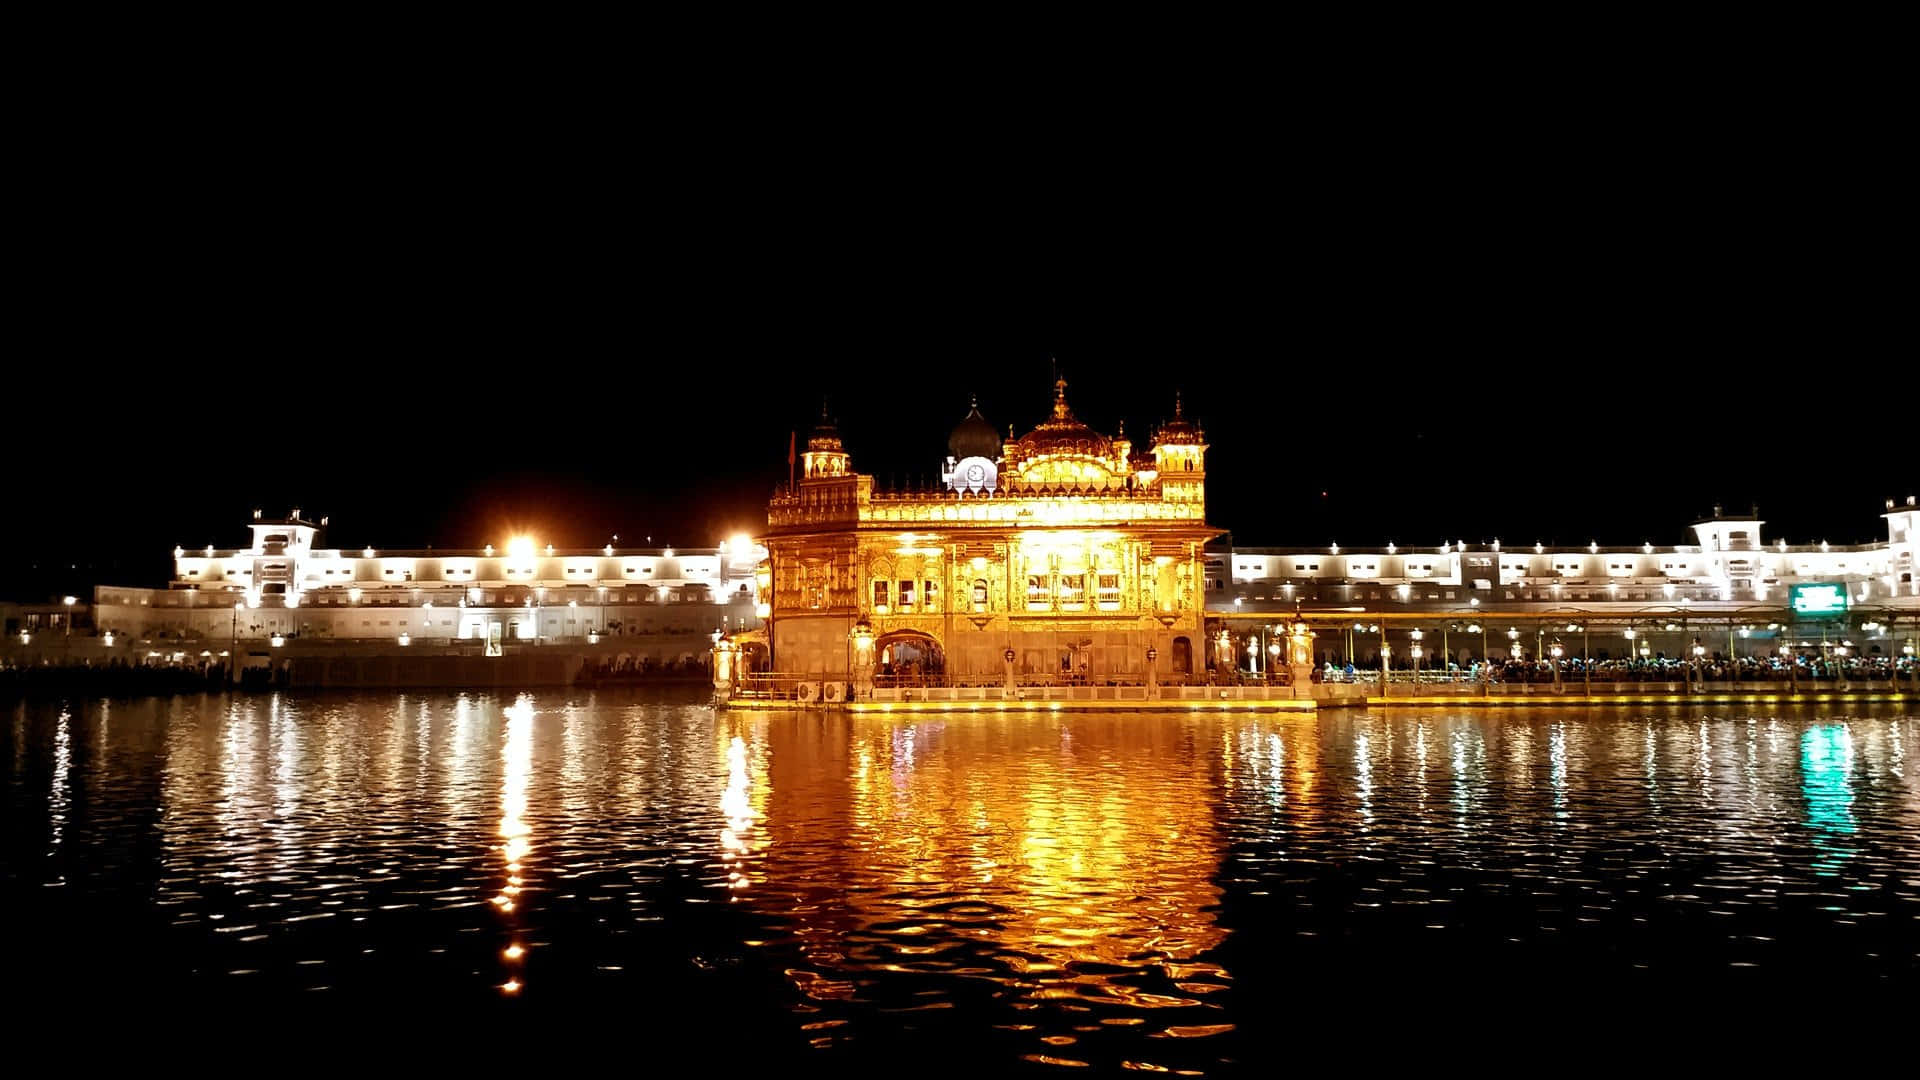 Serene view of the majestic Golden Temple reflecting on the calm waters